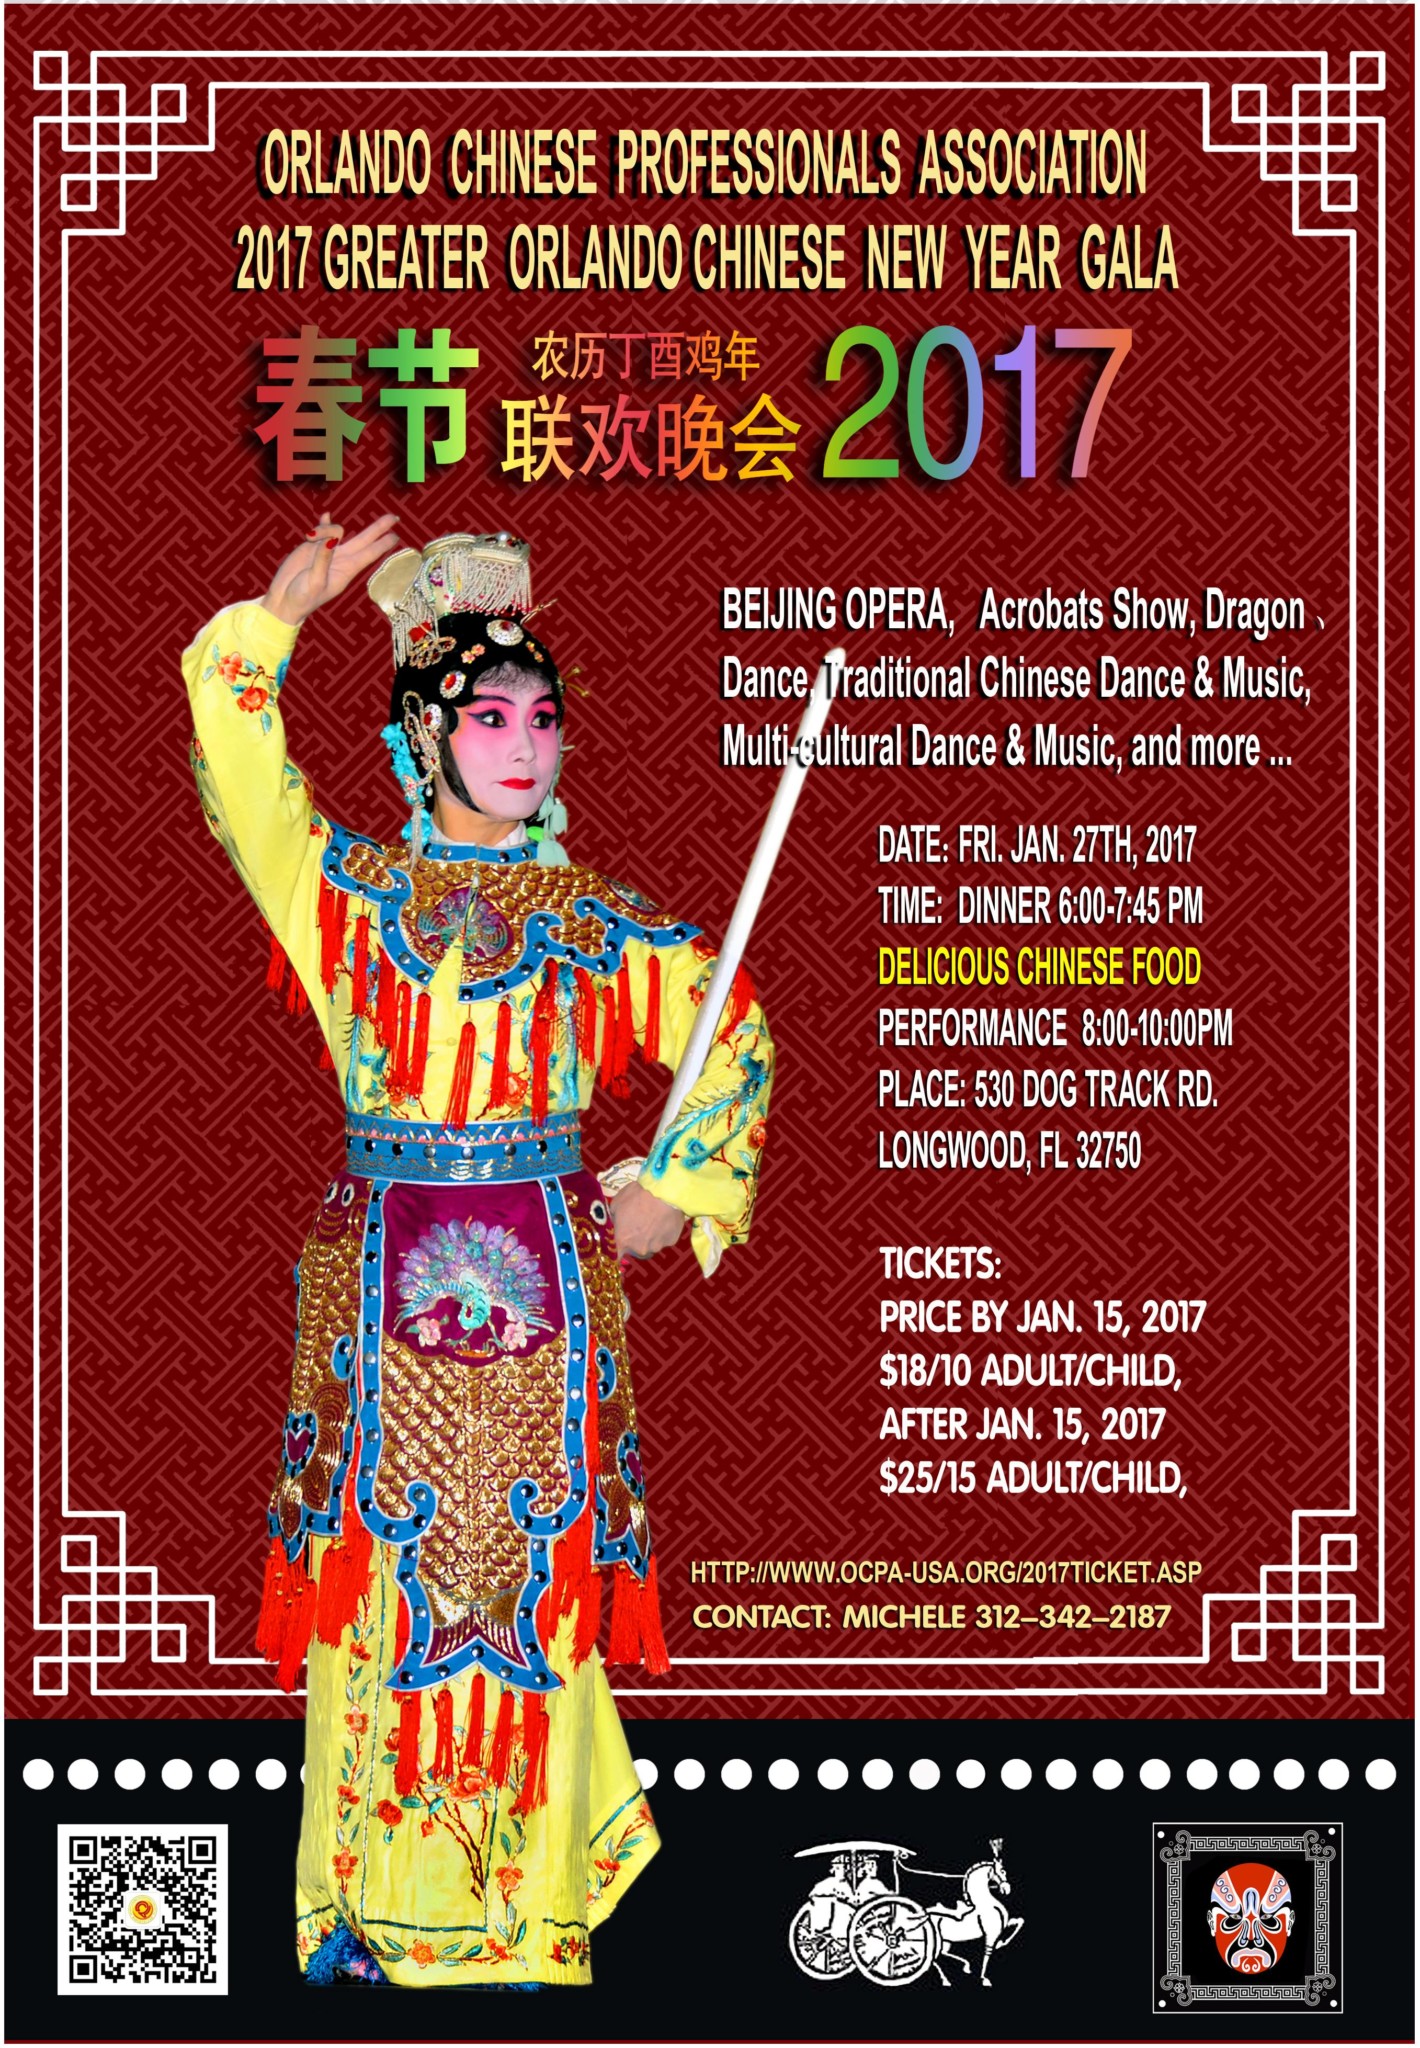 2017 Greater Orlando Chinese New Year Gala - Asia Trend1420 x 2048